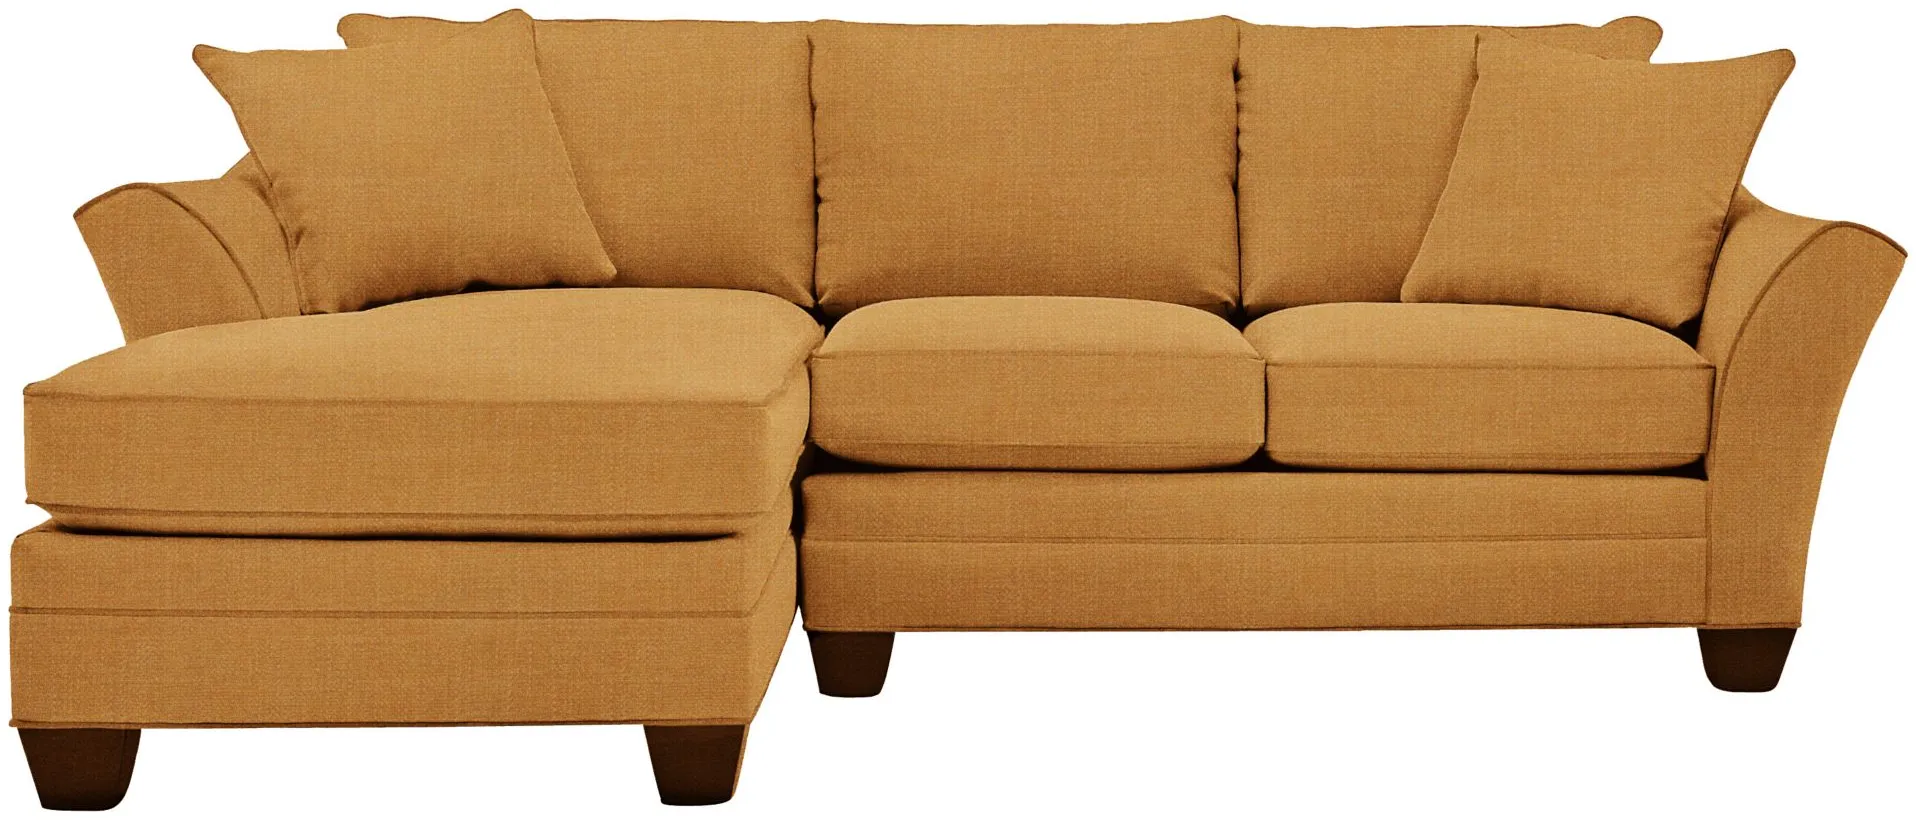 Foresthill 2-pc. Left Hand Chaise Sectional Sofa in Elliot Sunflower by H.M. Richards